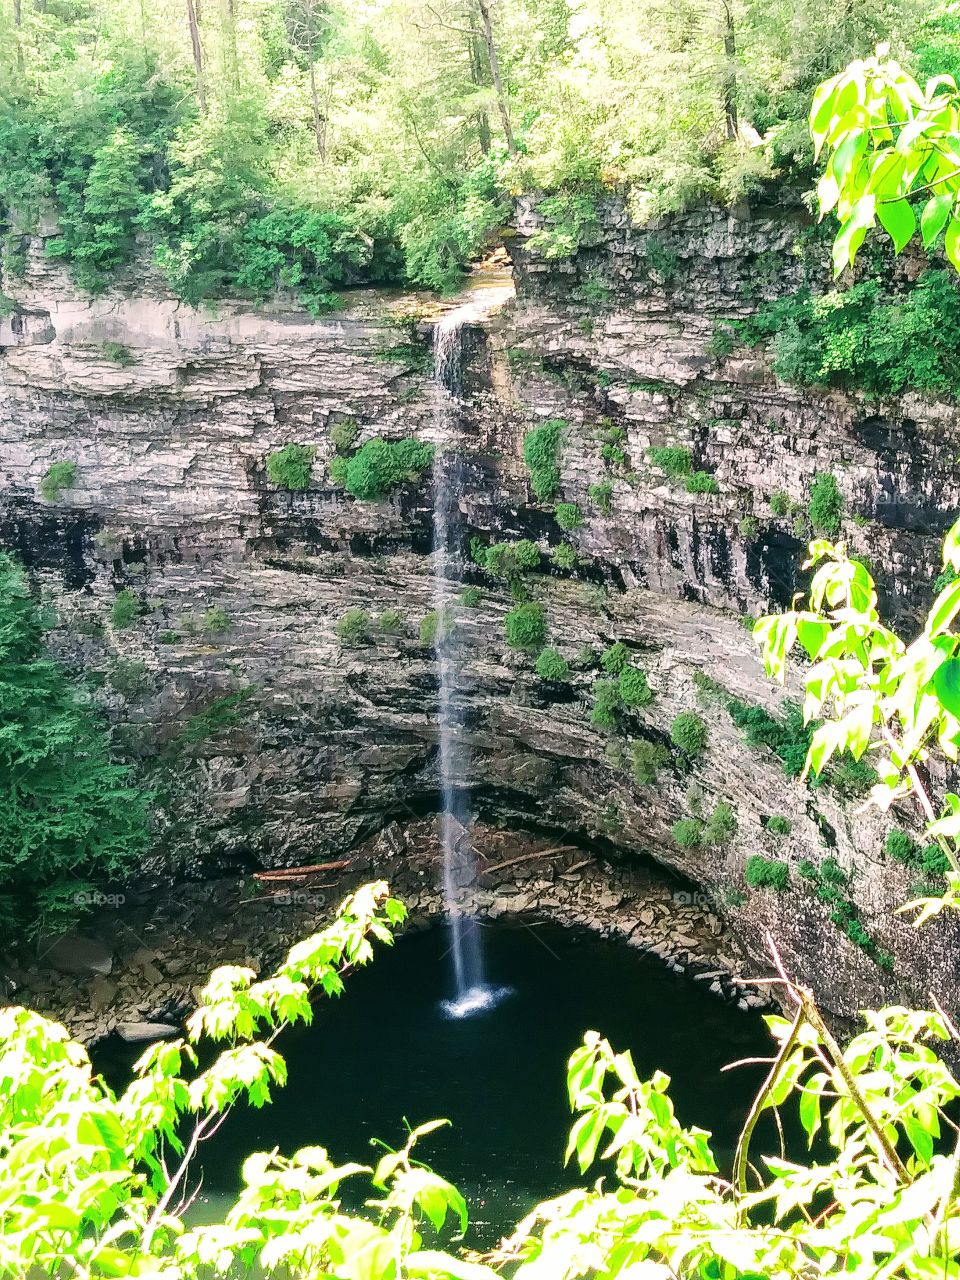 Rockhouse Falls in Tennessee